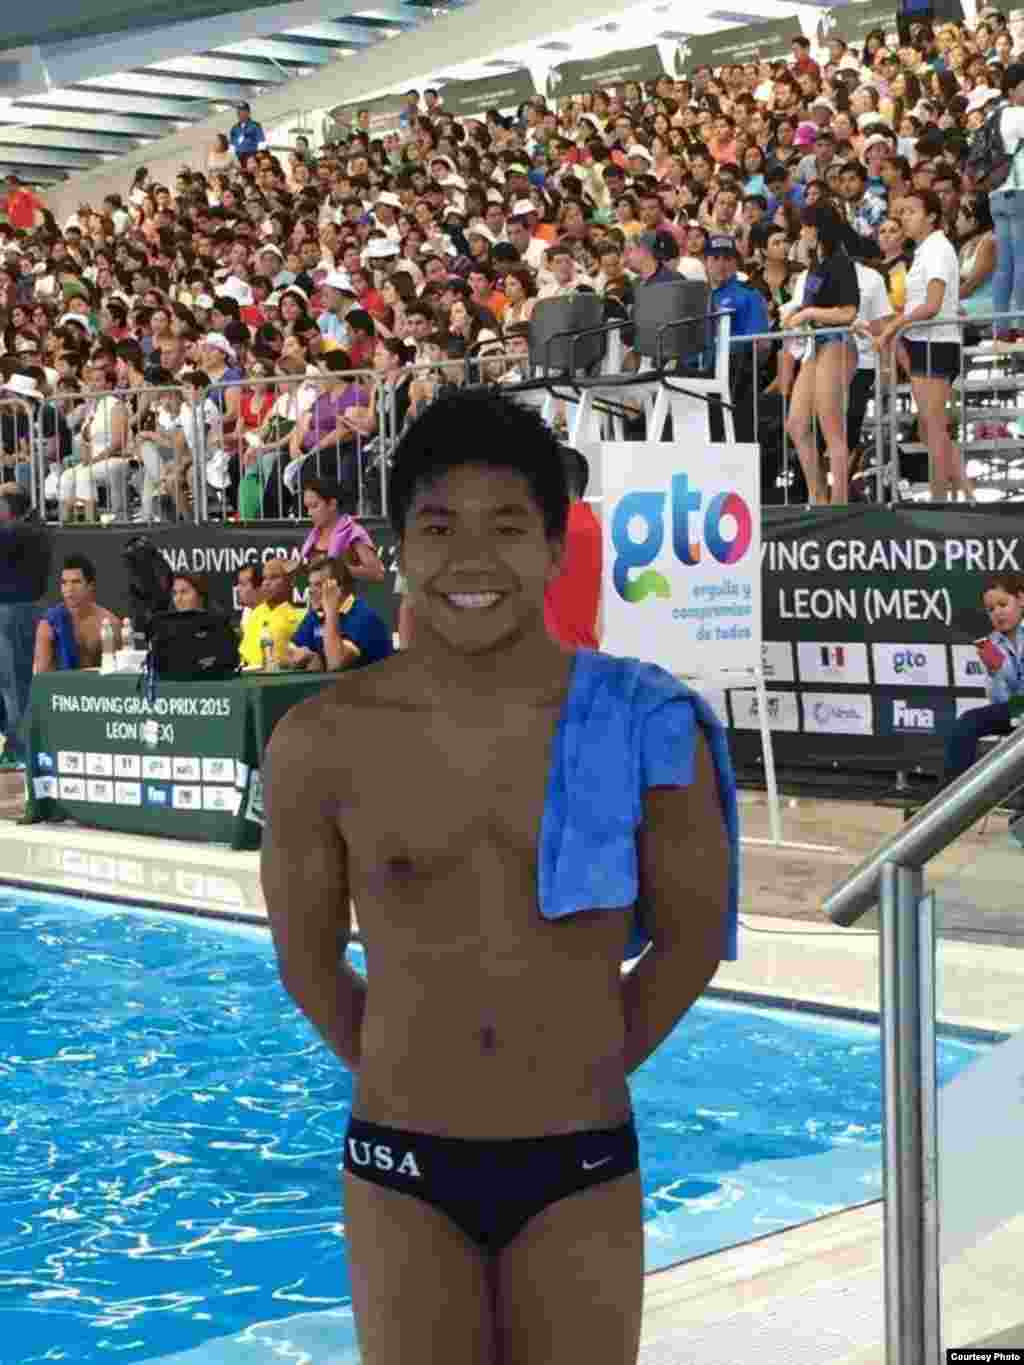 Jordan Pisey Windle, a Cambodian-born American, is a member of the United States National Team and is ranked in the top 5 divers in the United States. He has won numerous national championship titles, including the 10-meter platform and the Olympic silver medal for a synchronized diving partner.&nbsp;